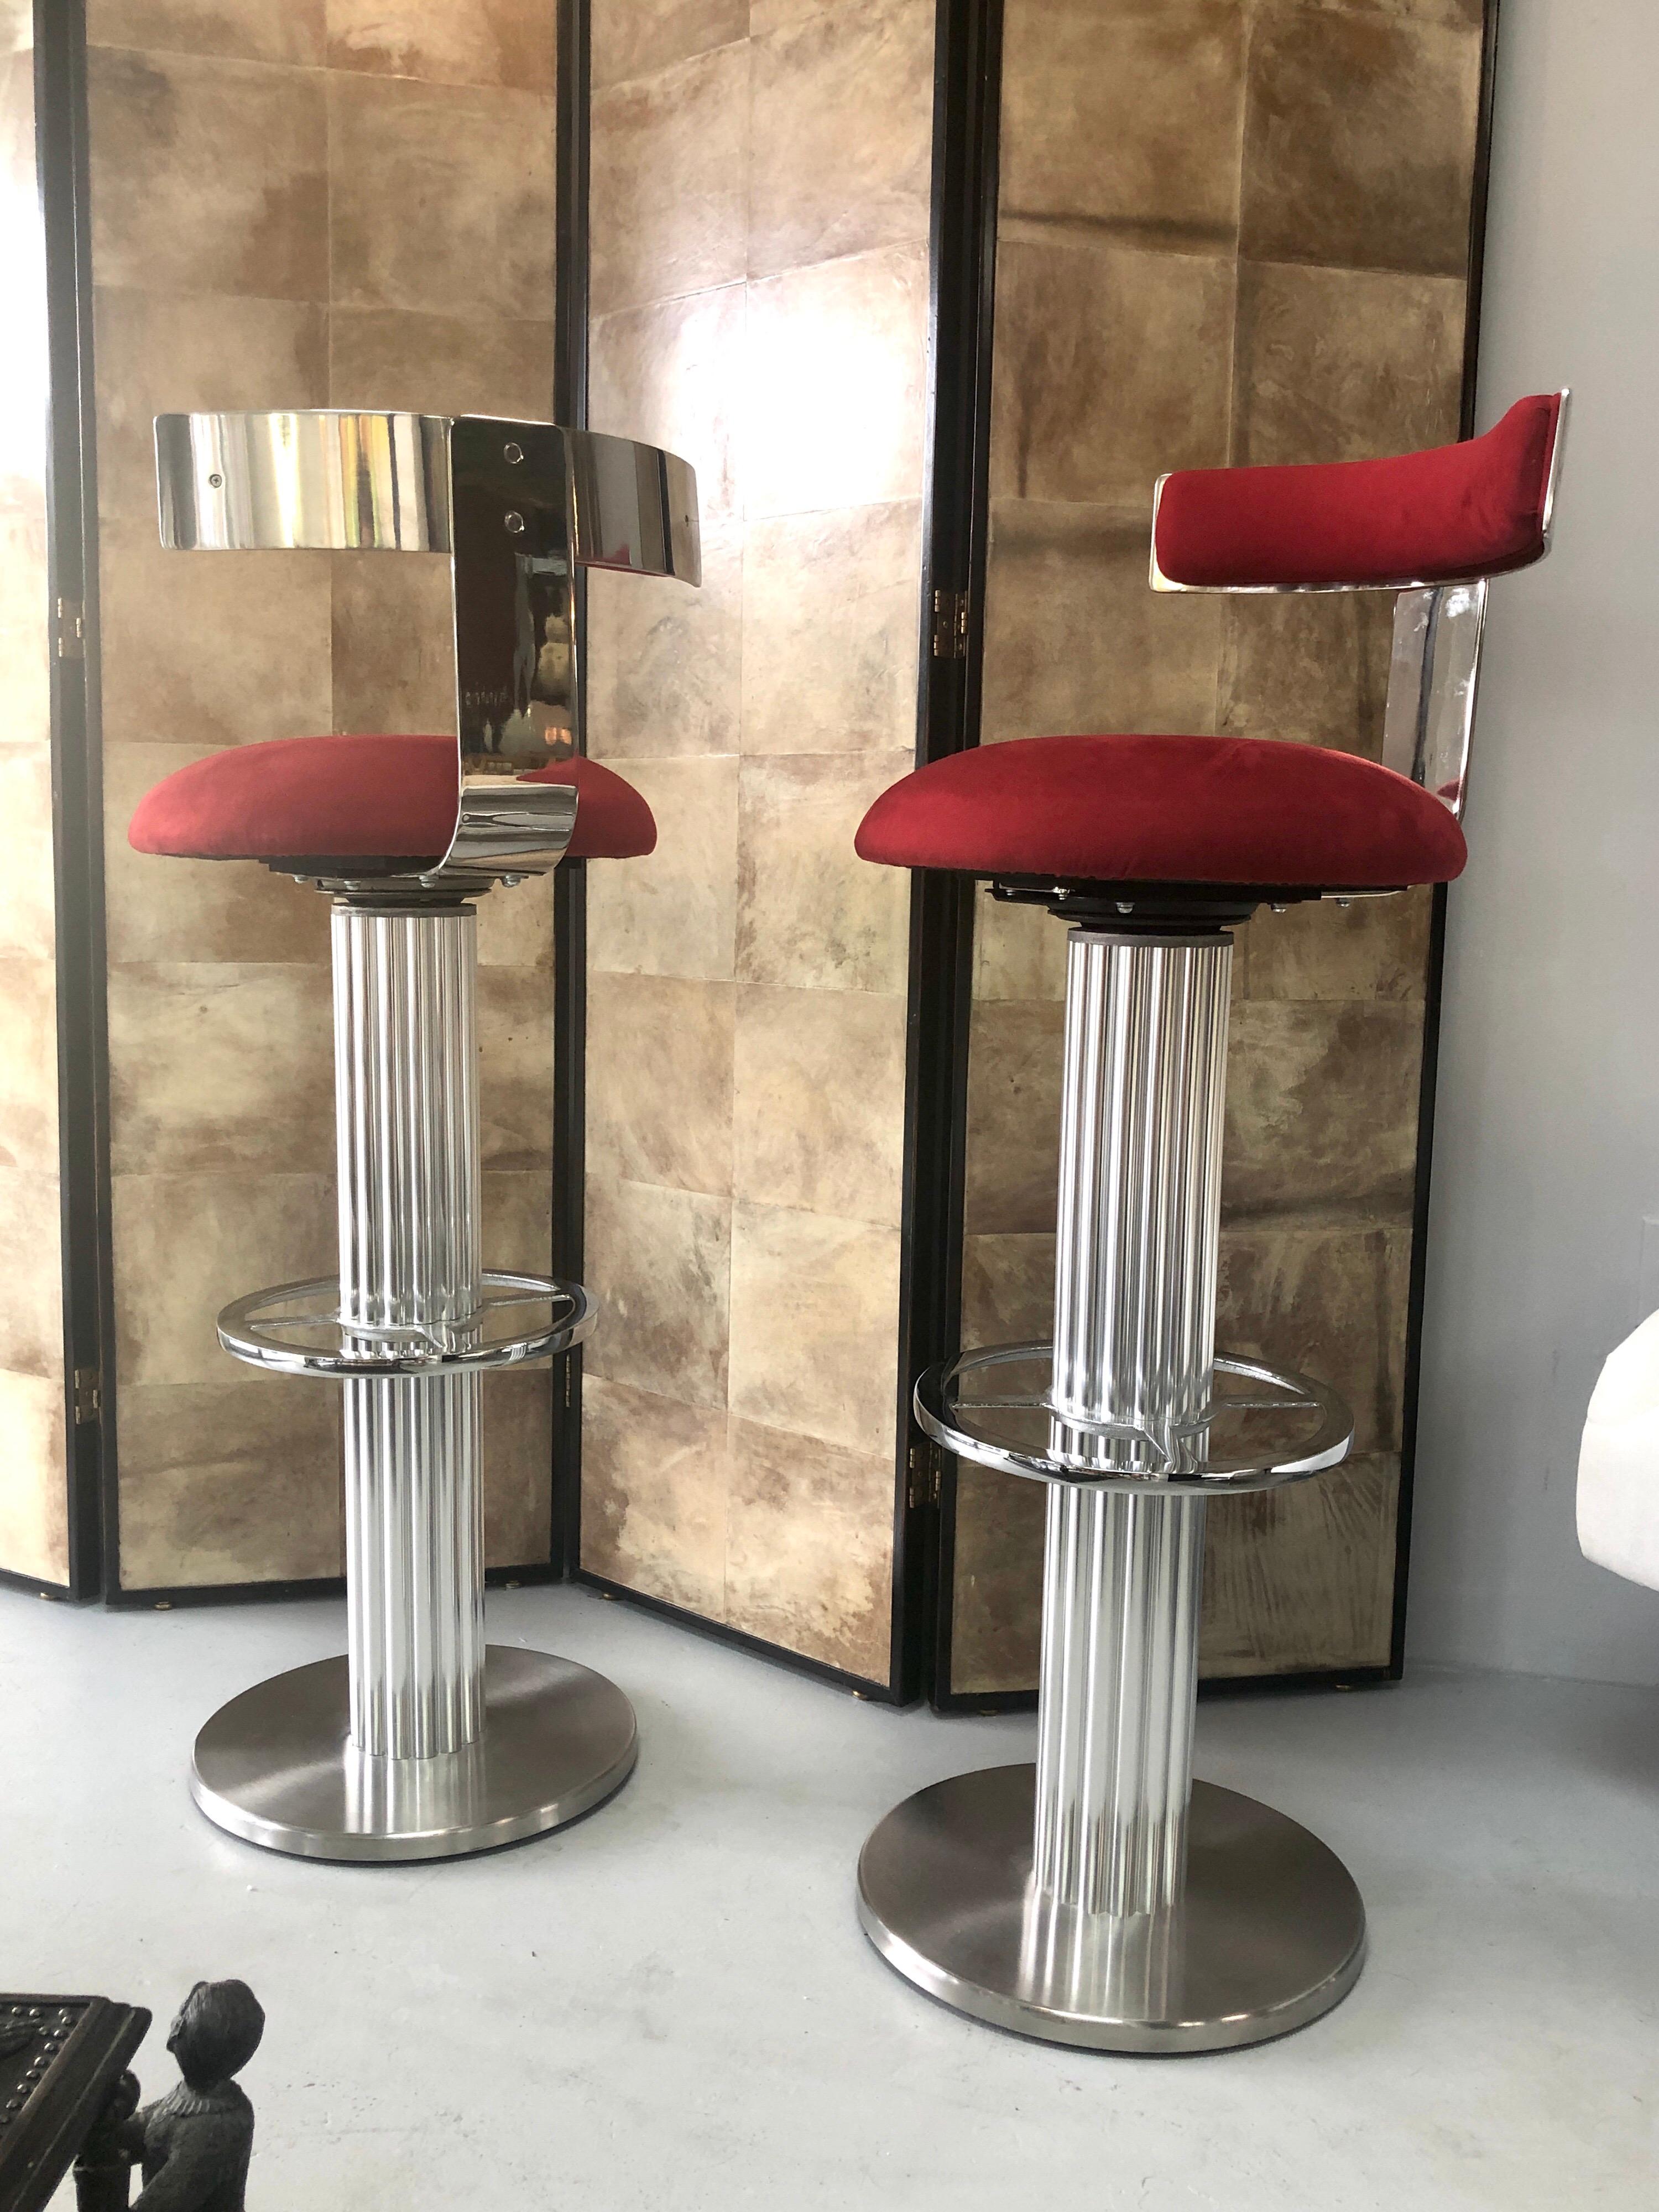 A great pair of bar stools by Designed for Leisure. Memory swivel seats. Retain the original red ultrasuede upholstery. The back and foot rest are mirror polished and the column has a satin finish. In very good condition, no issues.